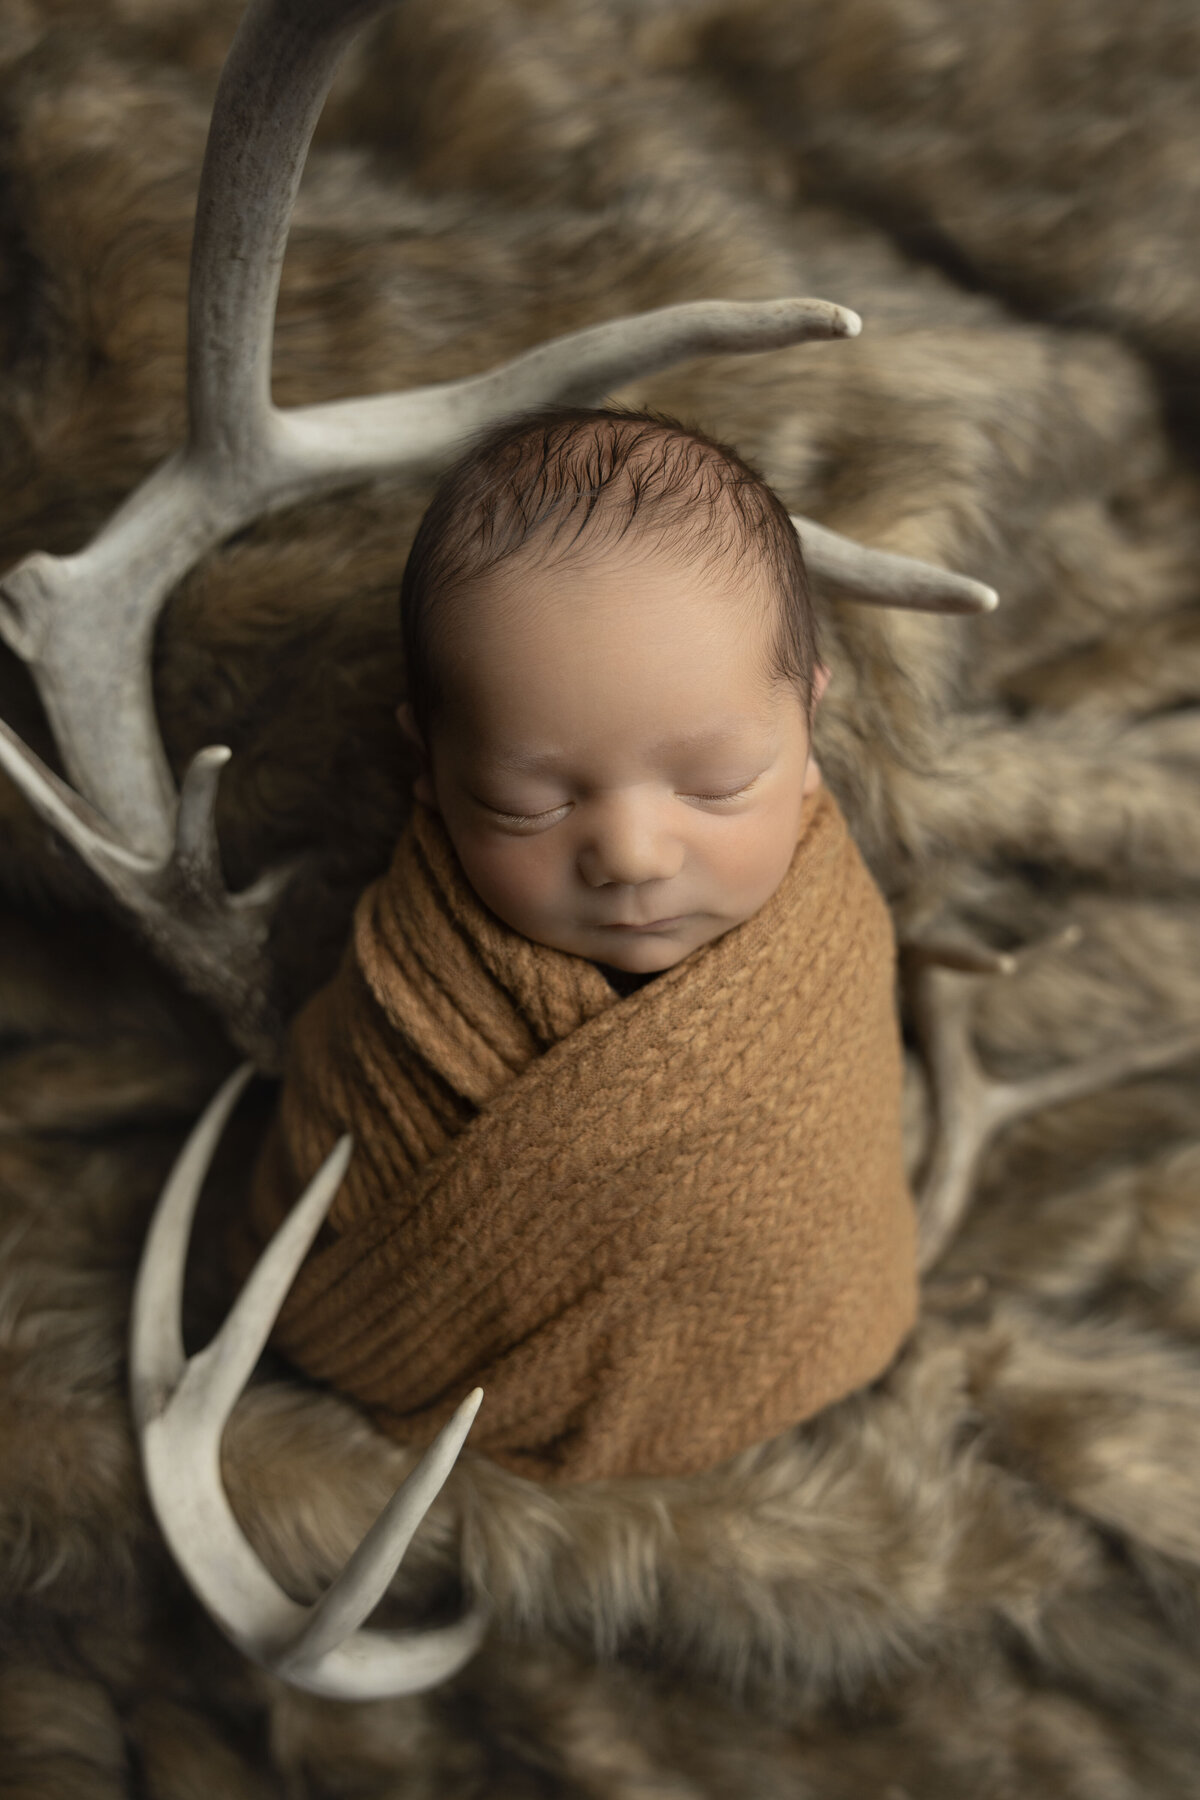 Swaddled baby lays on a fur blanket surrounded by deer antlers.